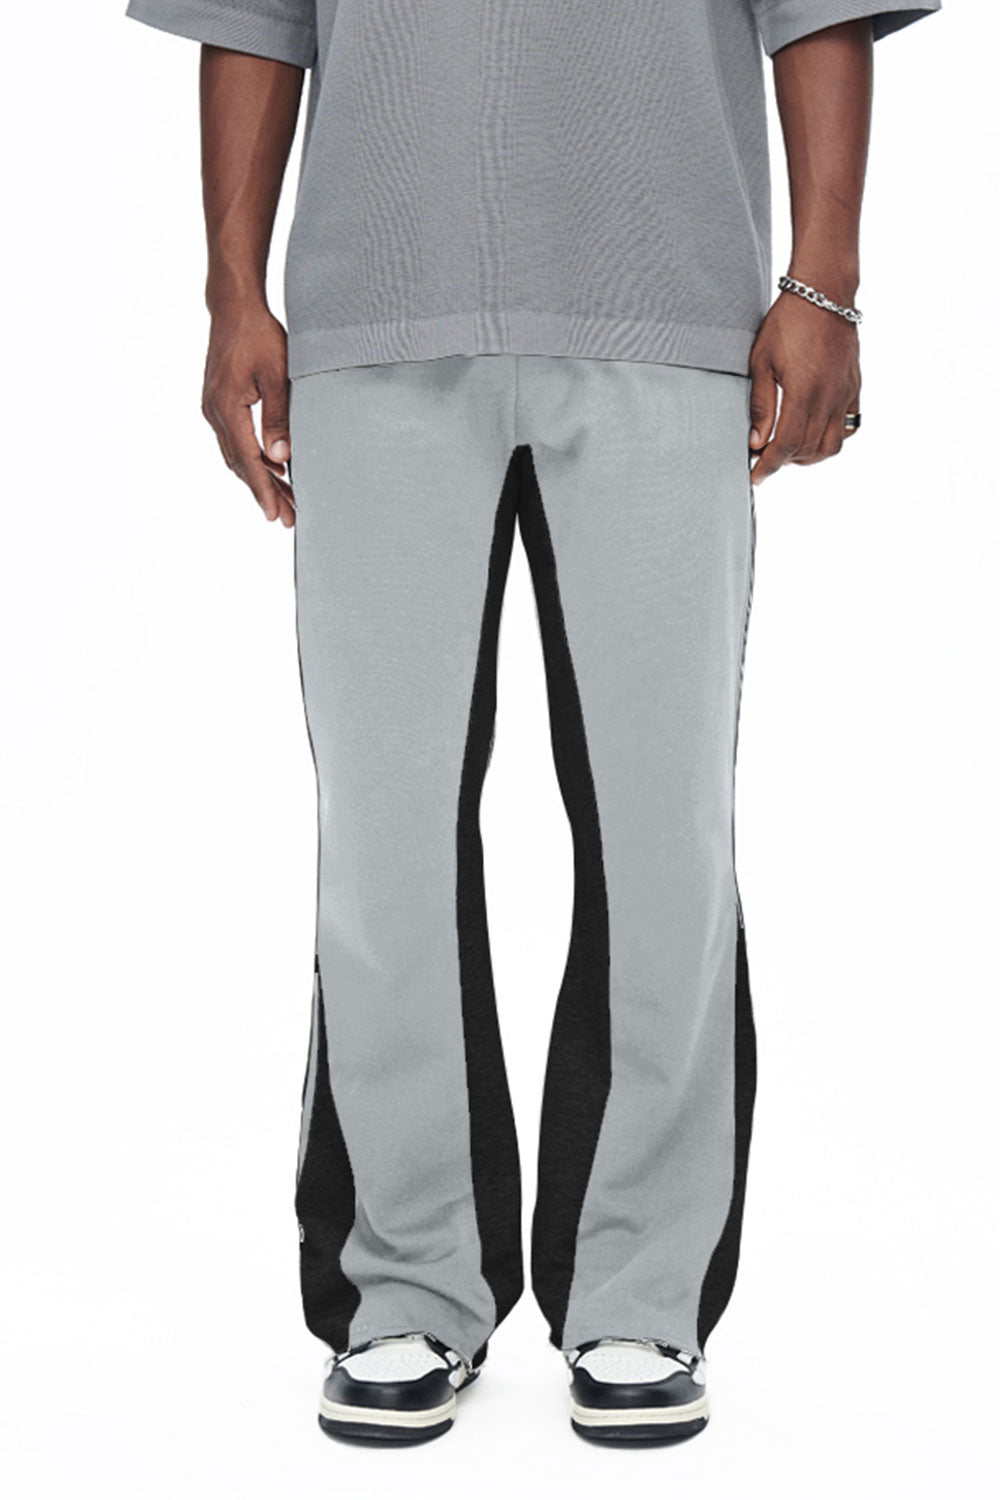 Contrast Bootcut Sweatpant Grey For Sale – GINGTTO